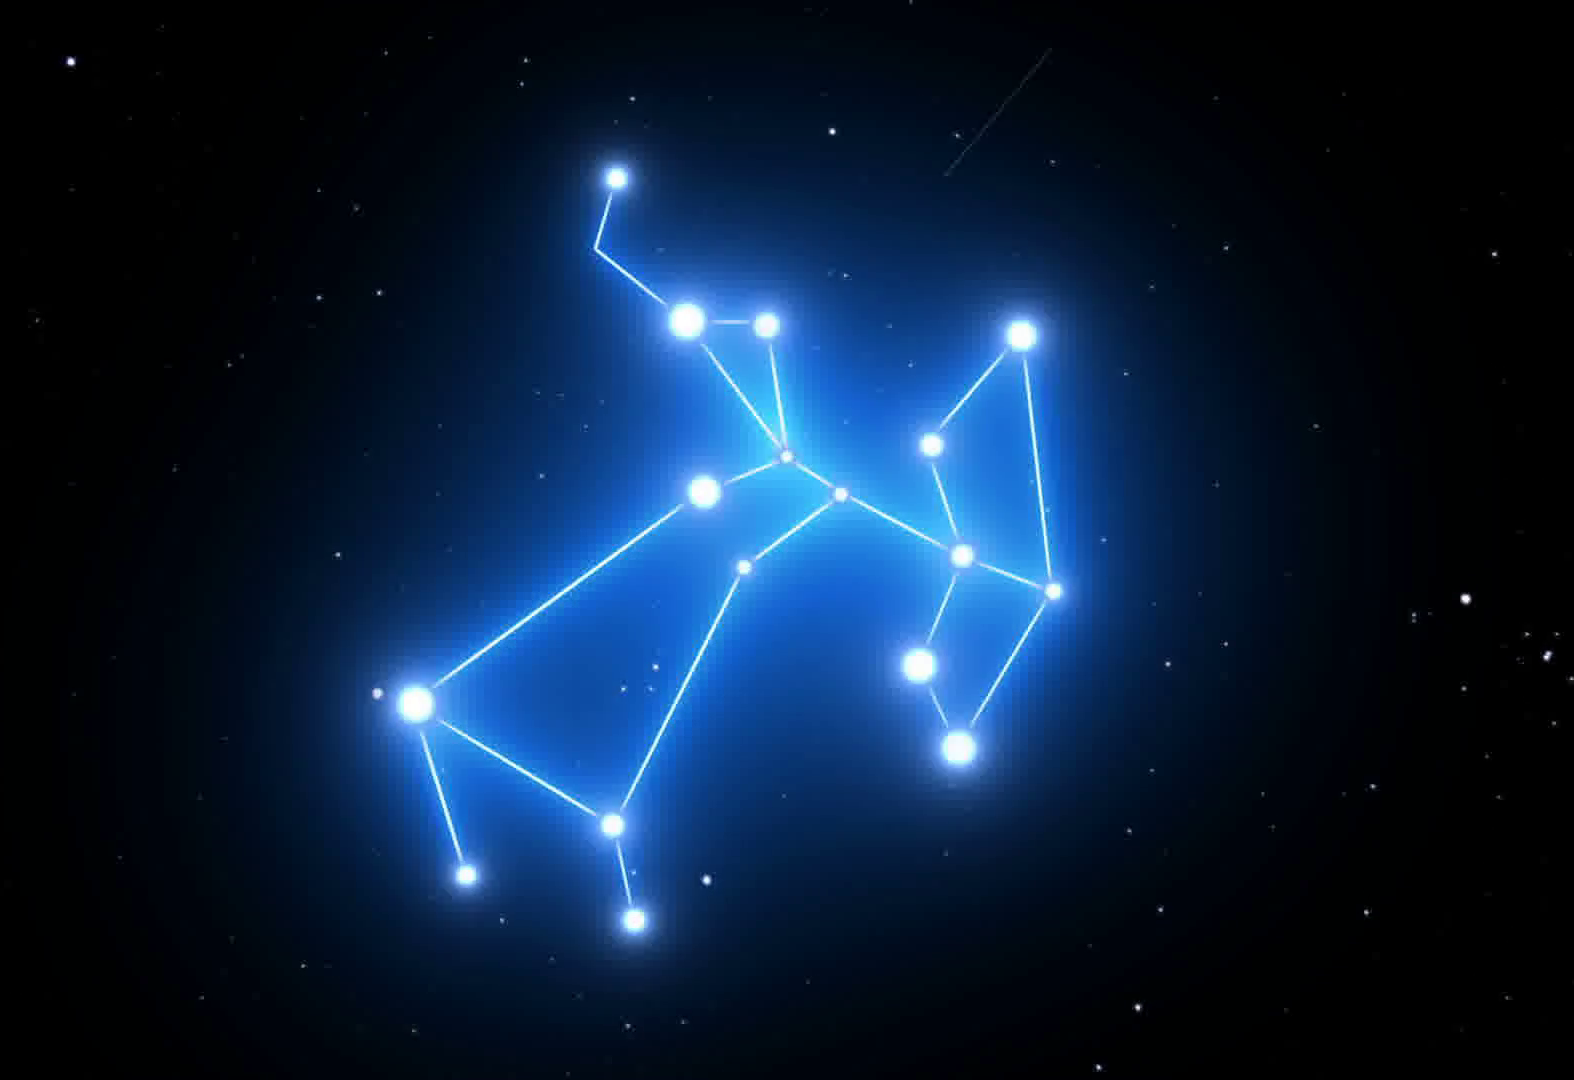 90% Of People Will Fail This Tricky General Knowledge Test. Will You? sagittarius constellation